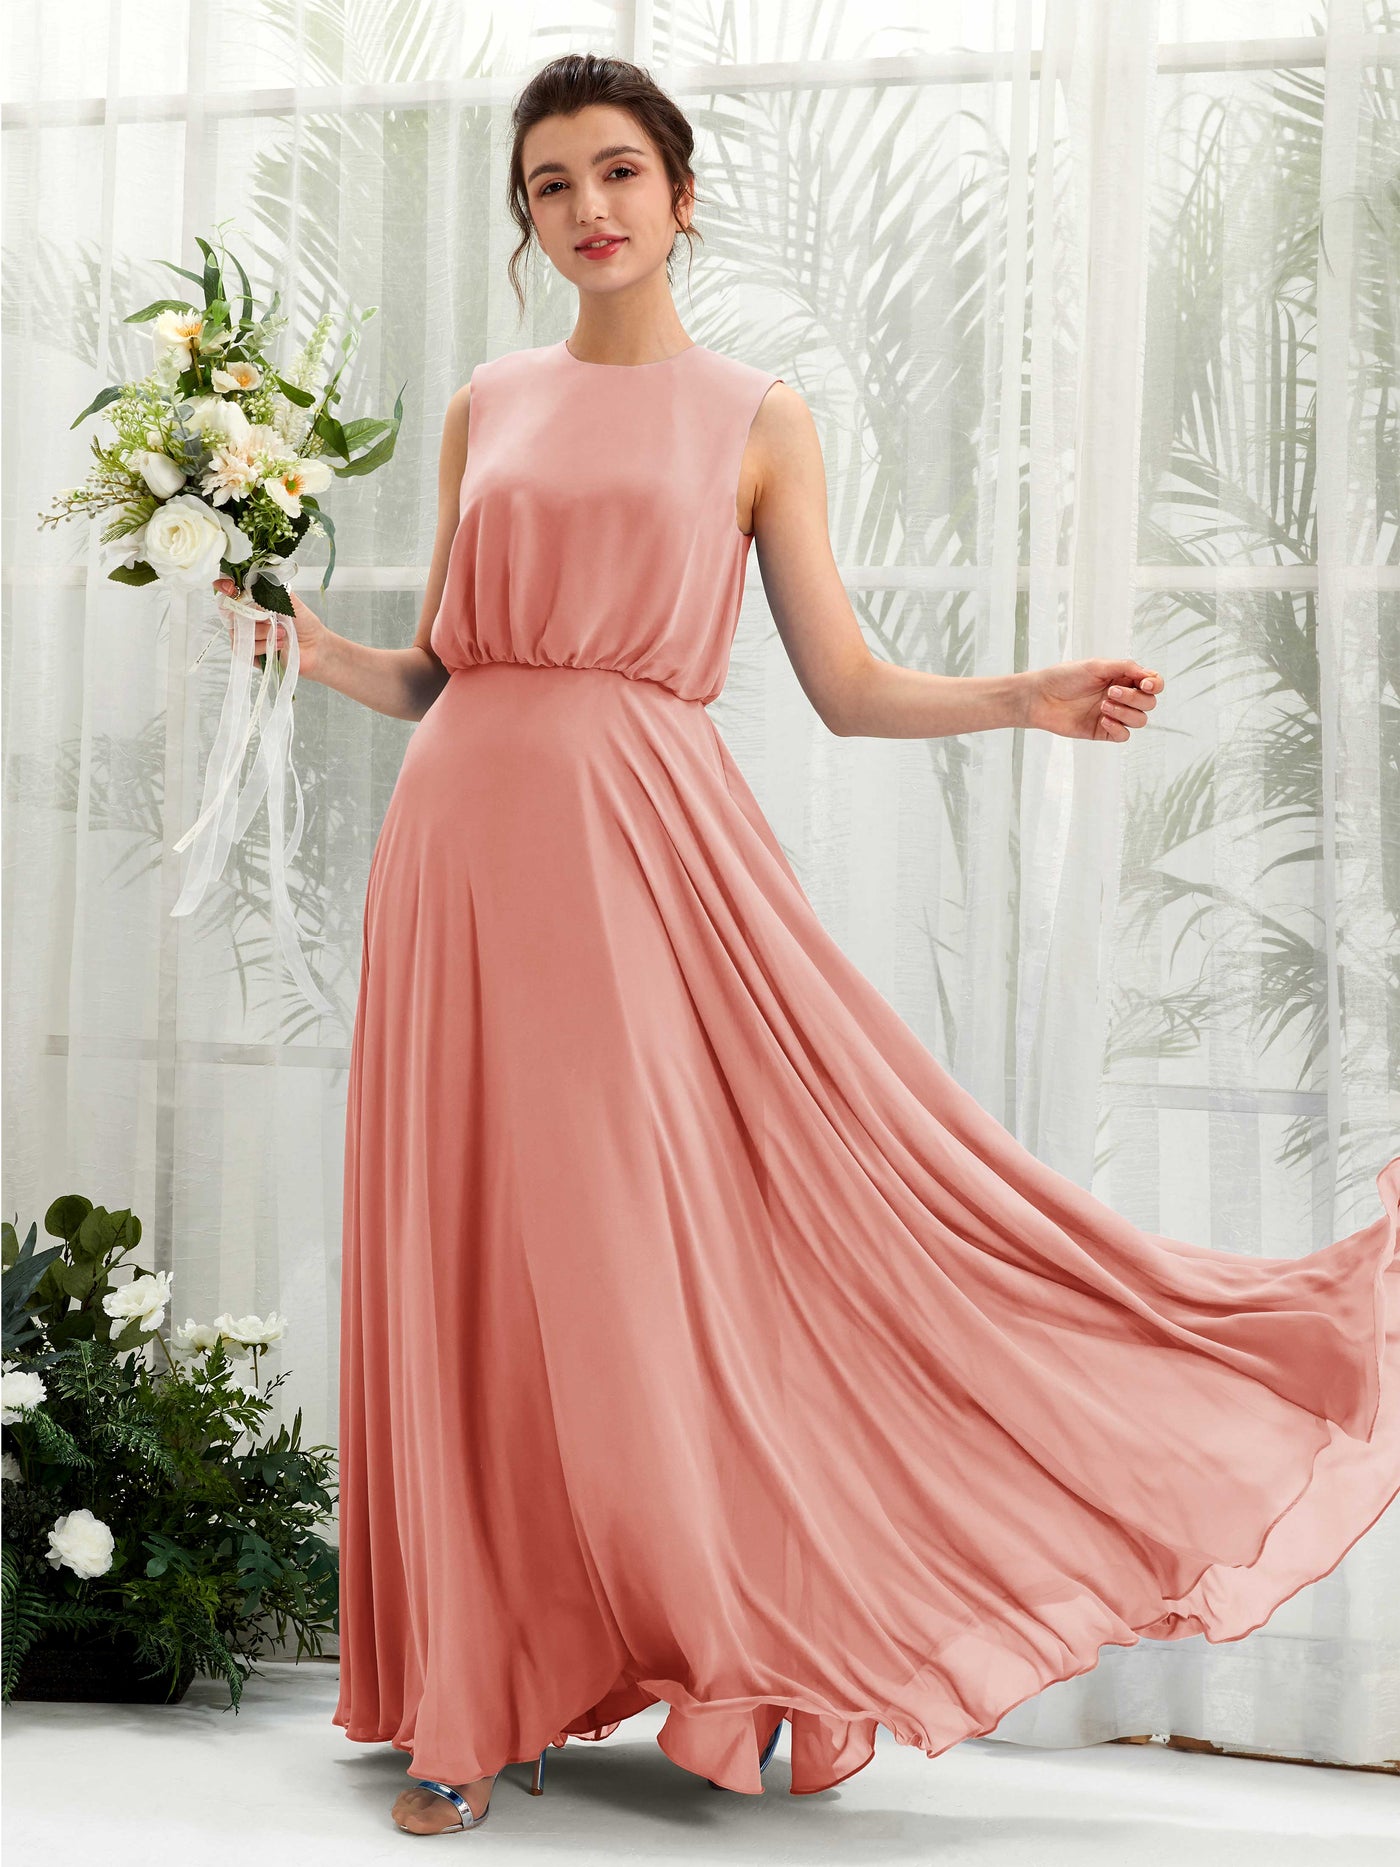 Champagne Rose Bridesmaid Dresses Bridesmaid Dress A-line Chiffon Round Full Length Sleeveless Wedding Party Dress (81222806)#color_champagne-rose